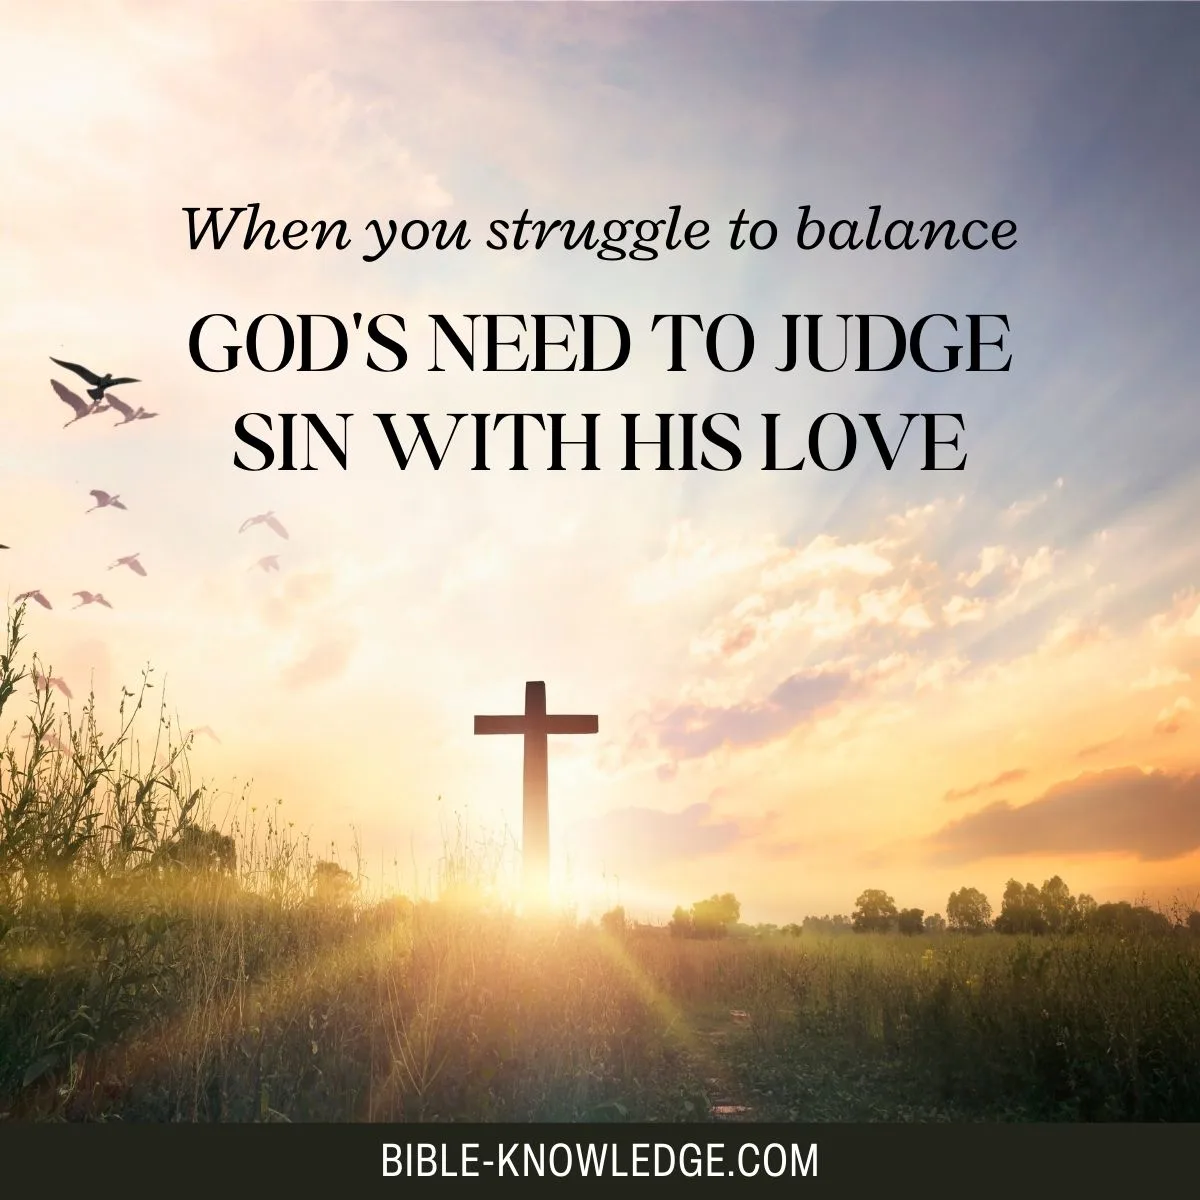 When You Struggle to Balance God’s Need to Judge Sin with His Love